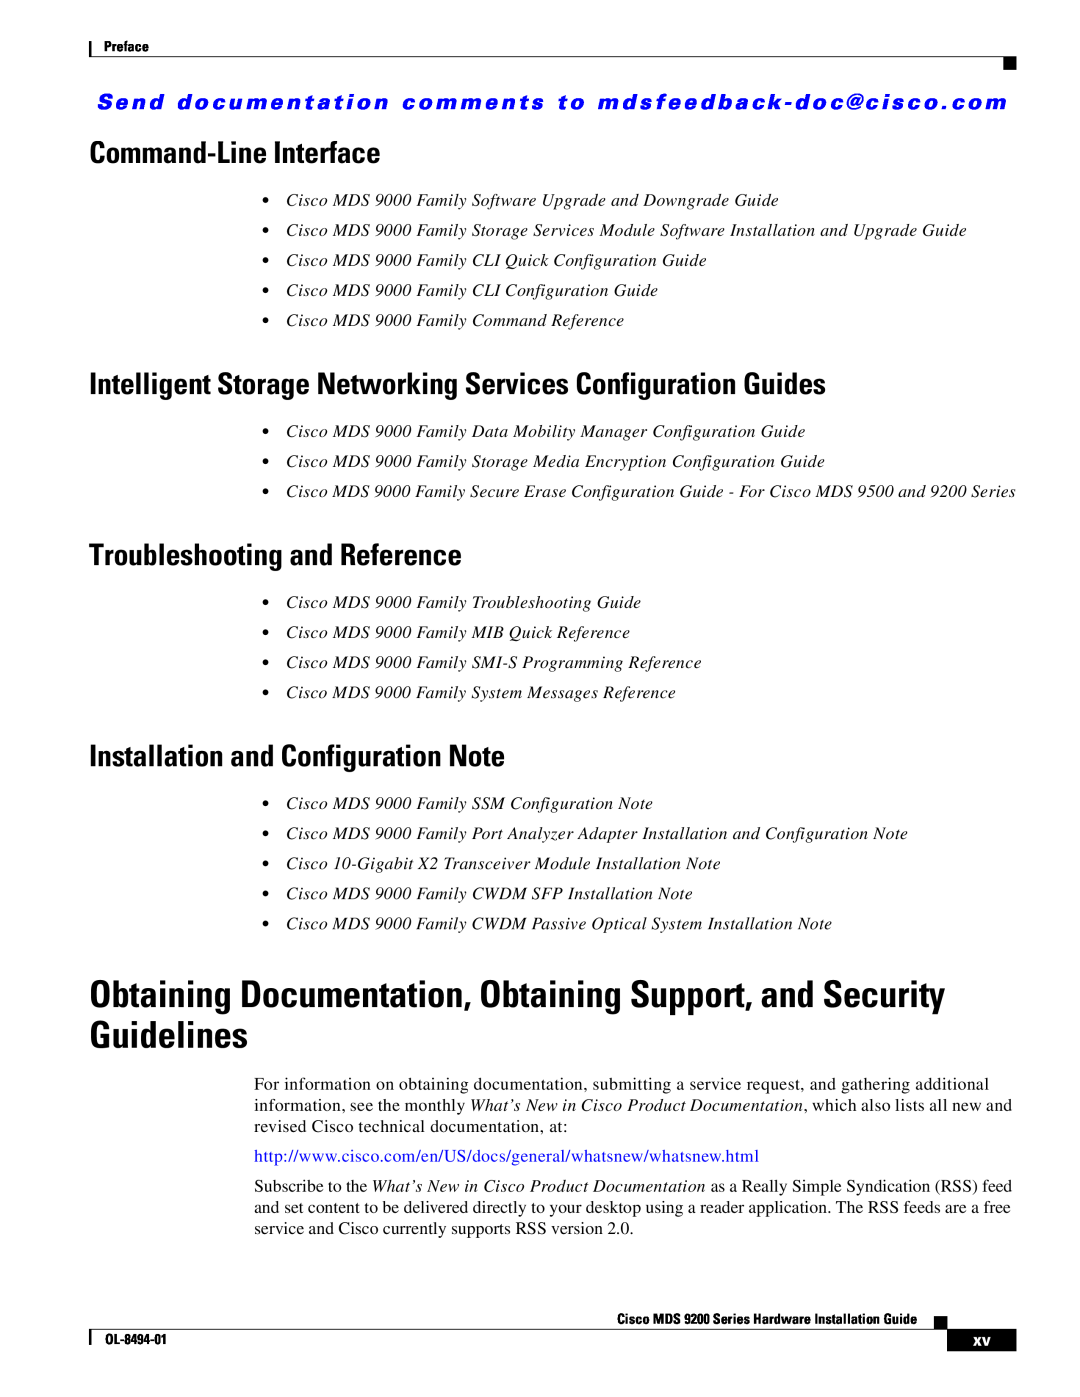 Cisco Systems MDS 9200 Series Obtaining Documentation, Obtaining Support, and Security Guidelines, Command-Line Interface 